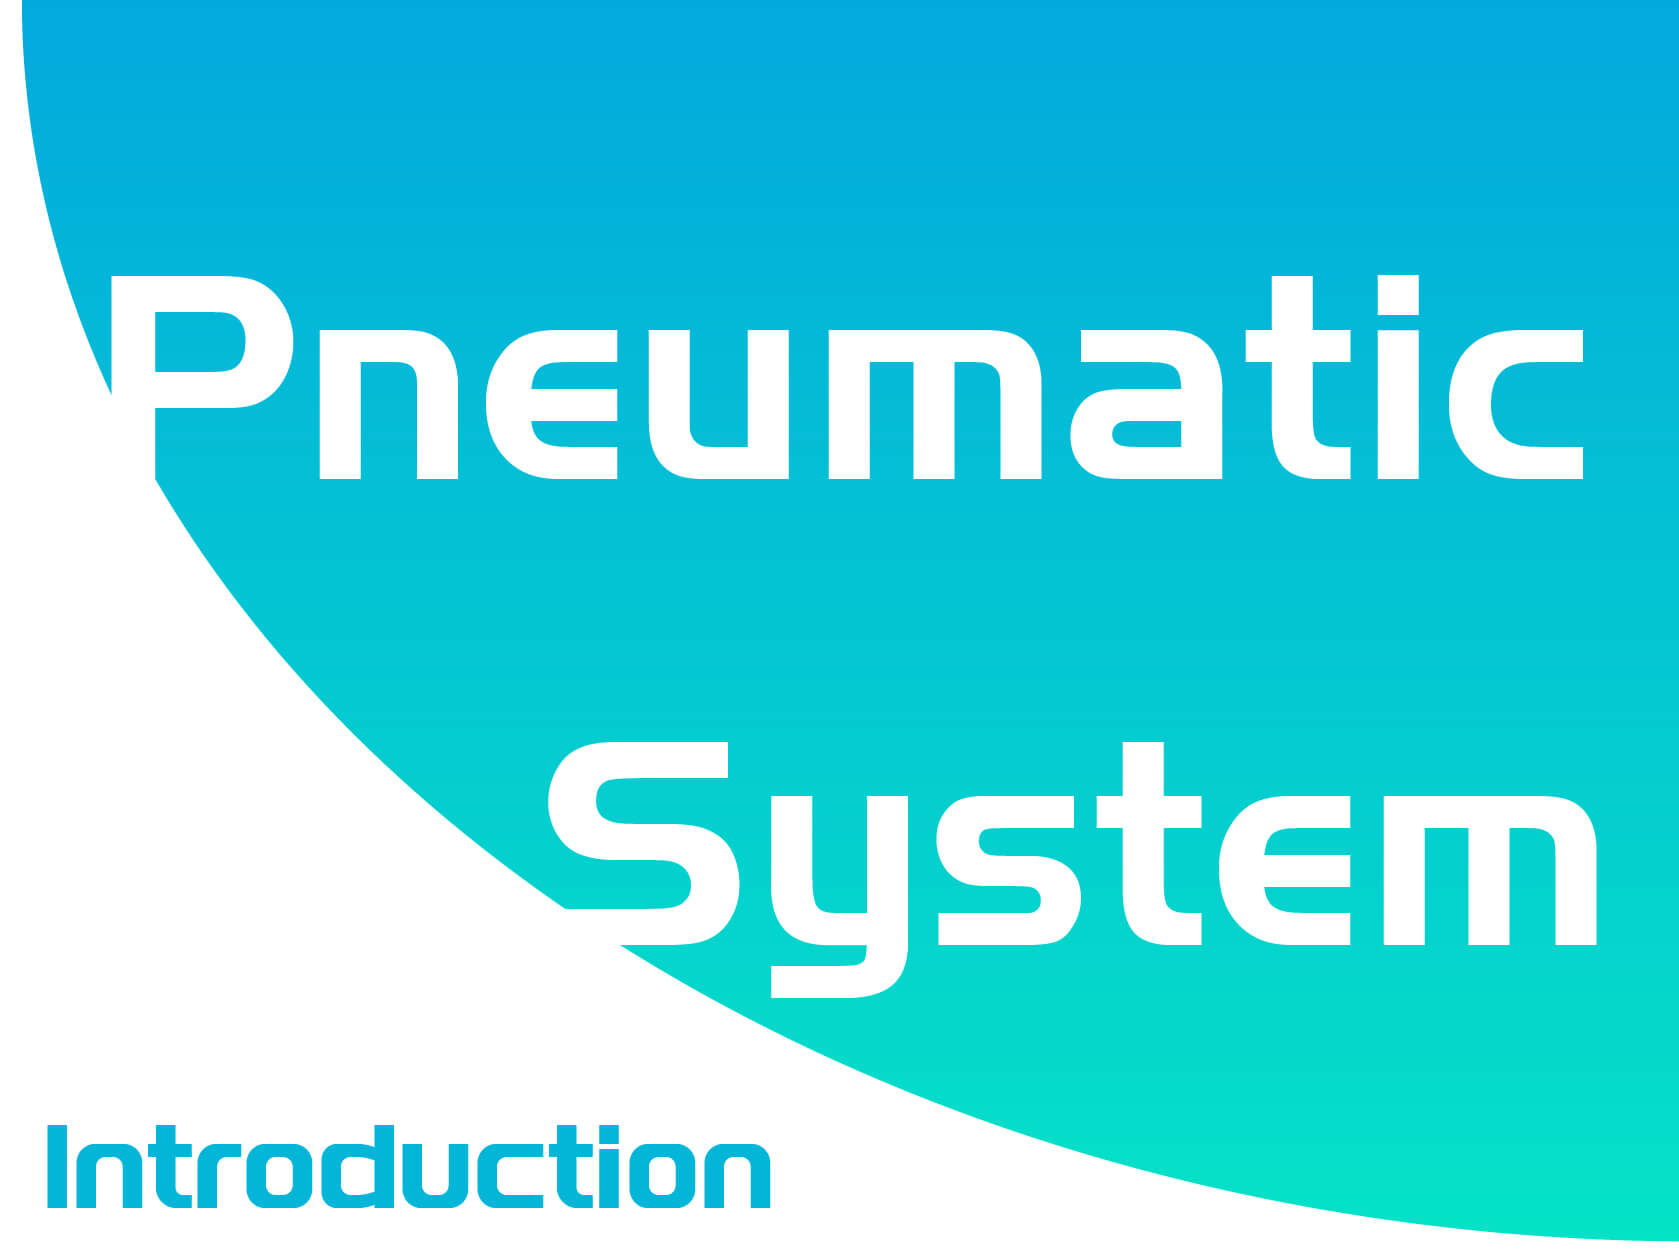 What is the Pneumatic System?